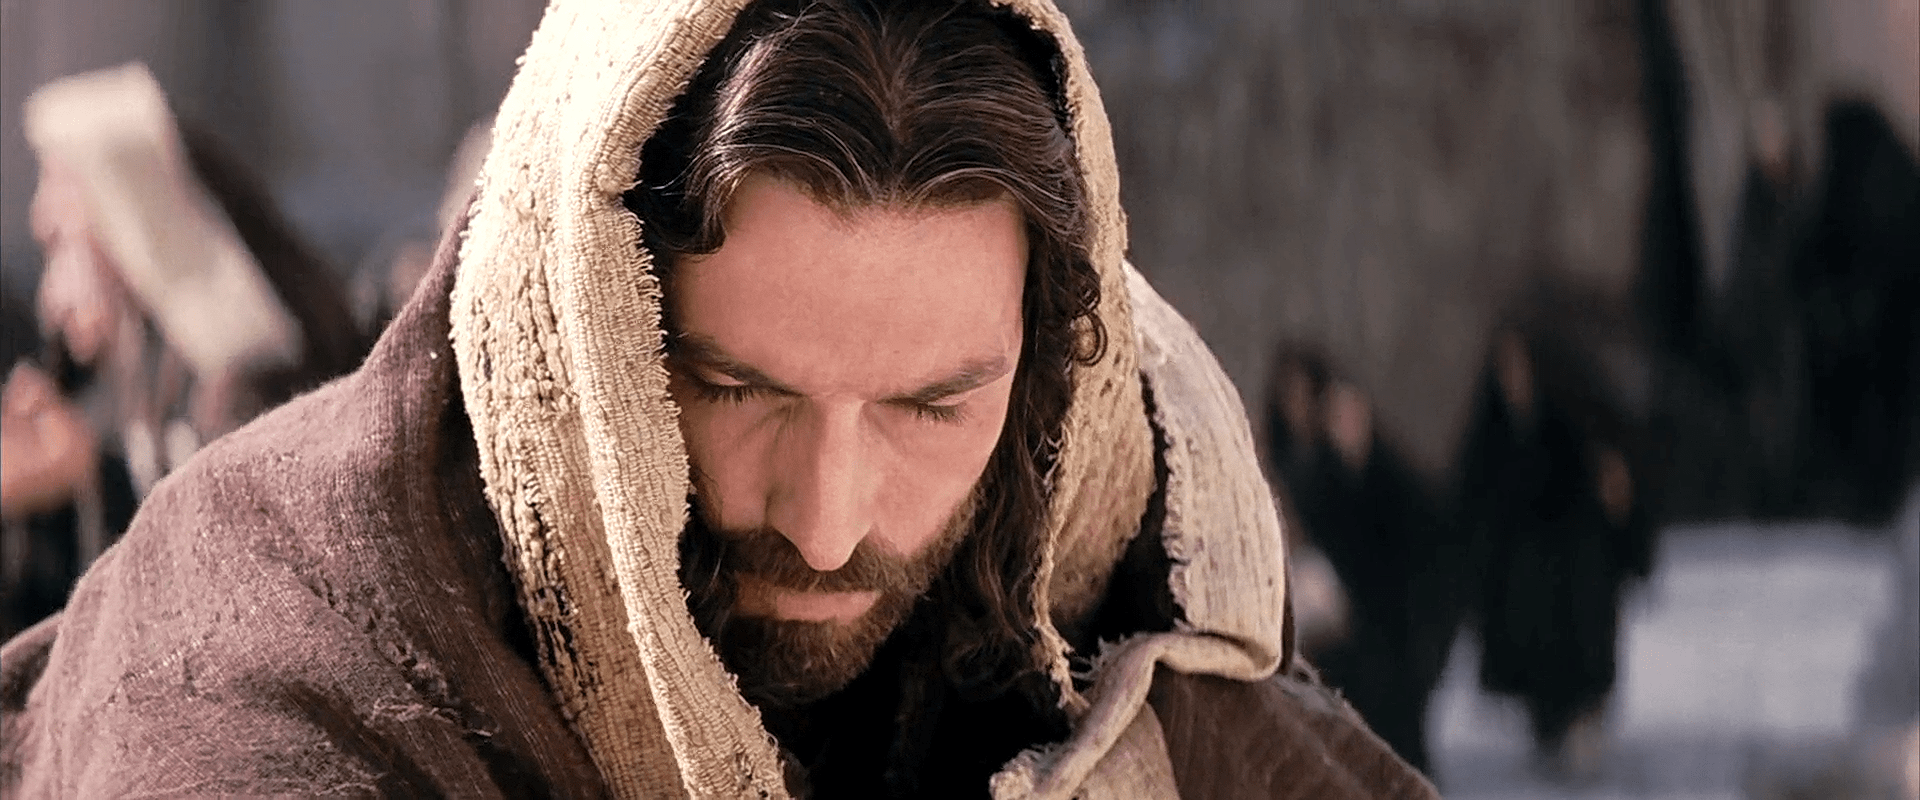 Watch passion of the christ english dubbed